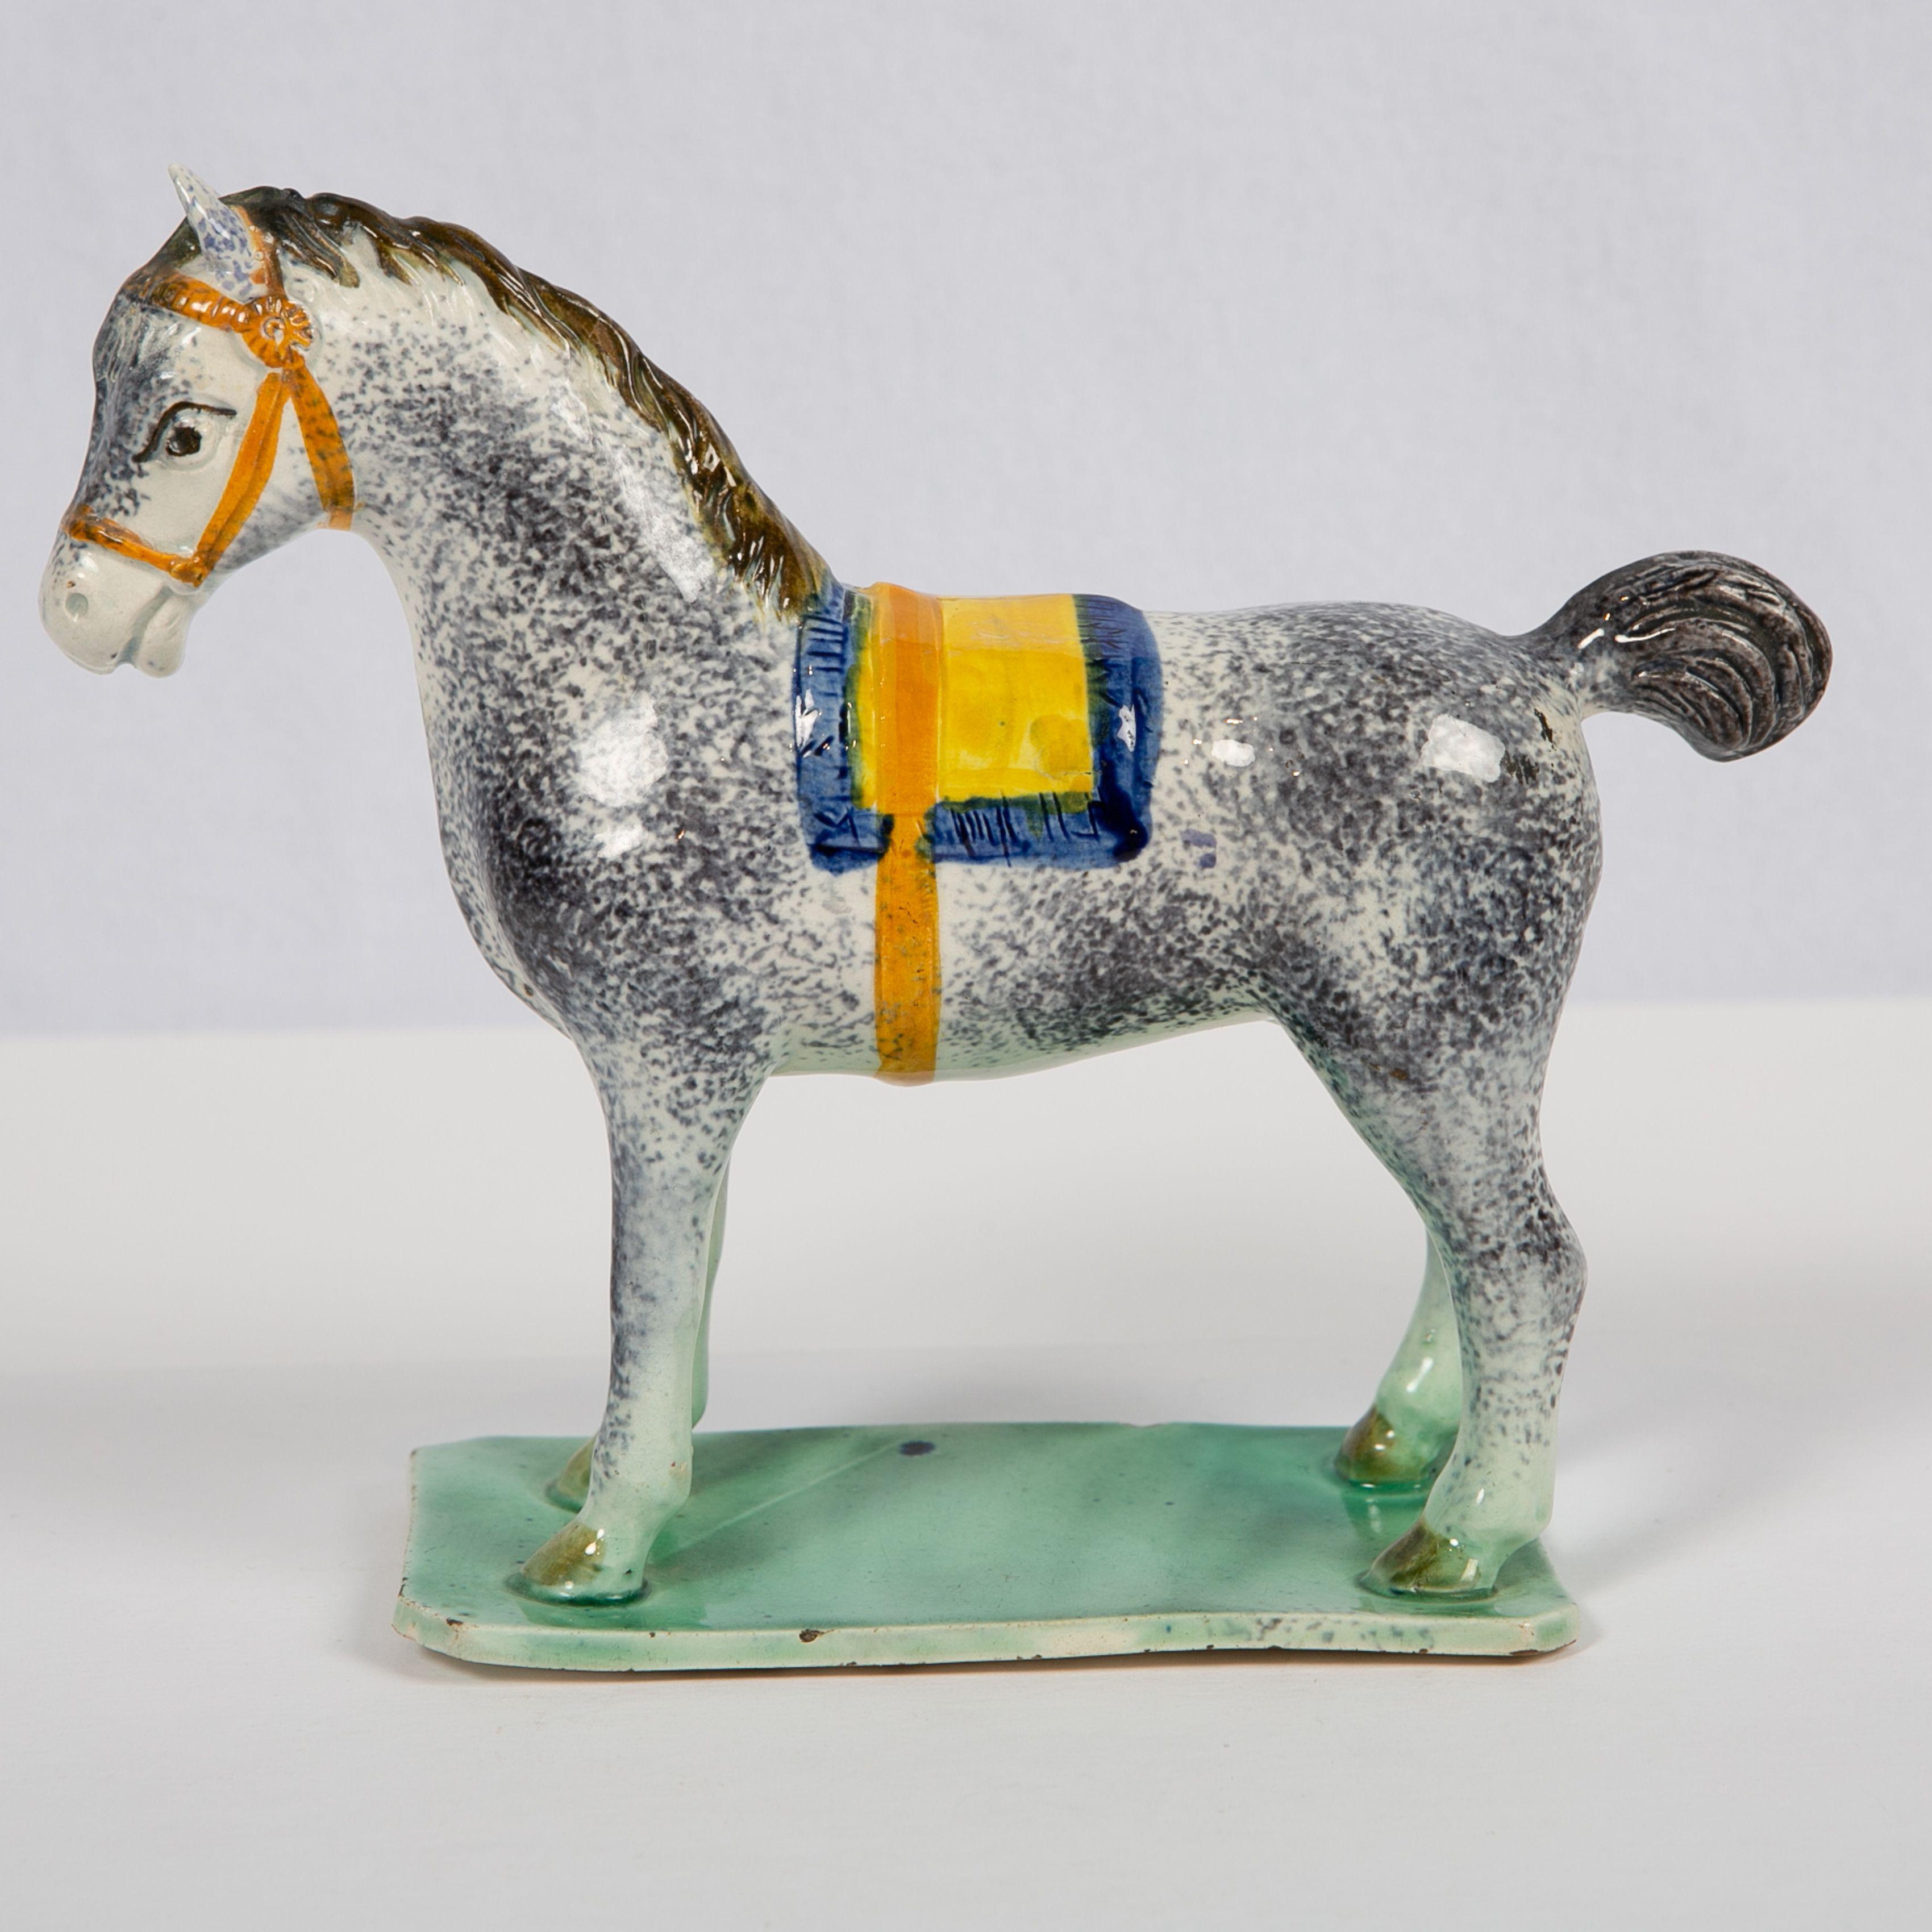 Provenance: with paper labels for the Zimmerman Collection and Art Trading Ltd.
This exceptional pearlware pottery figure of a saddled horse is charmingly rendered. The hand painted blue and yellow saddlecloth and orange halter highlight the